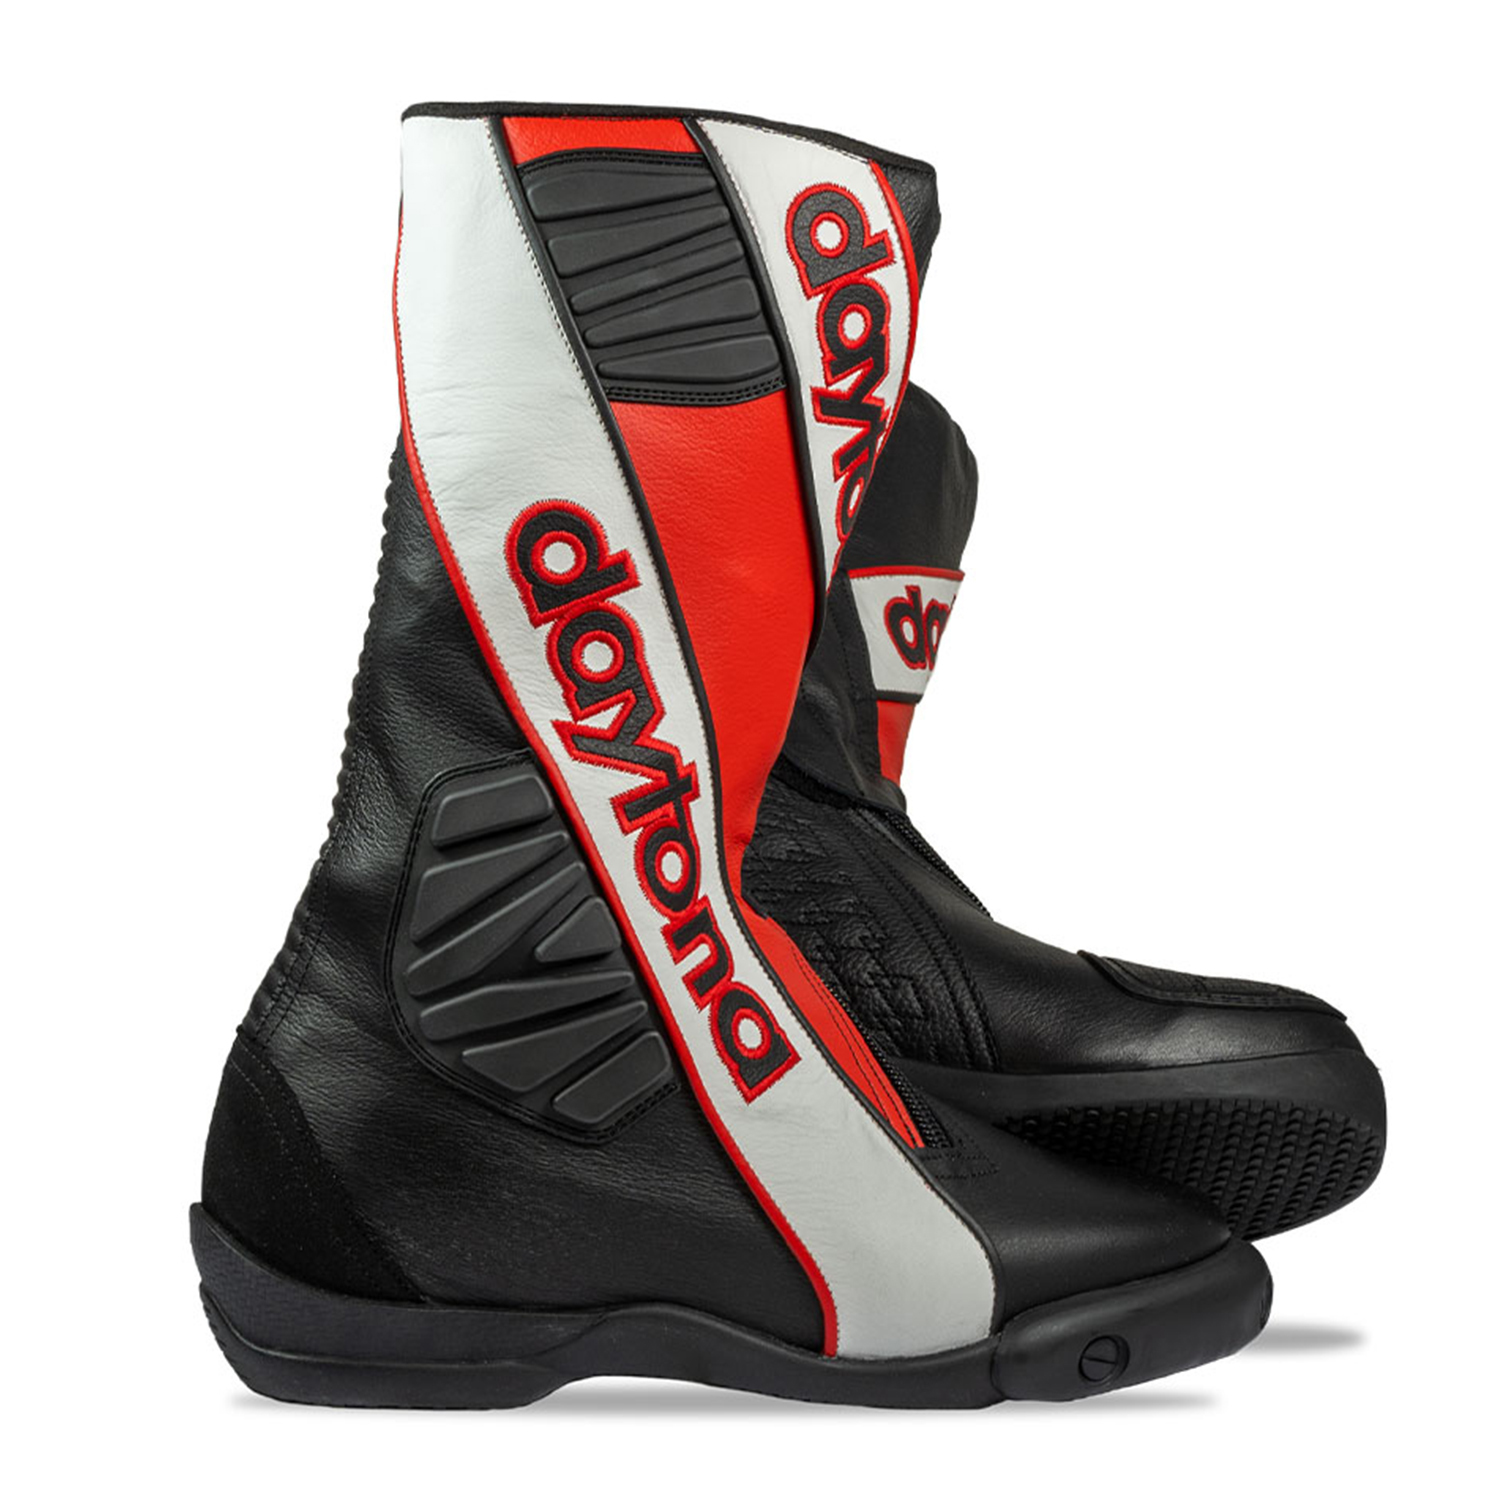 Daytona Security EVO G3 Boots Black-White-Red - Available in Various Sizes